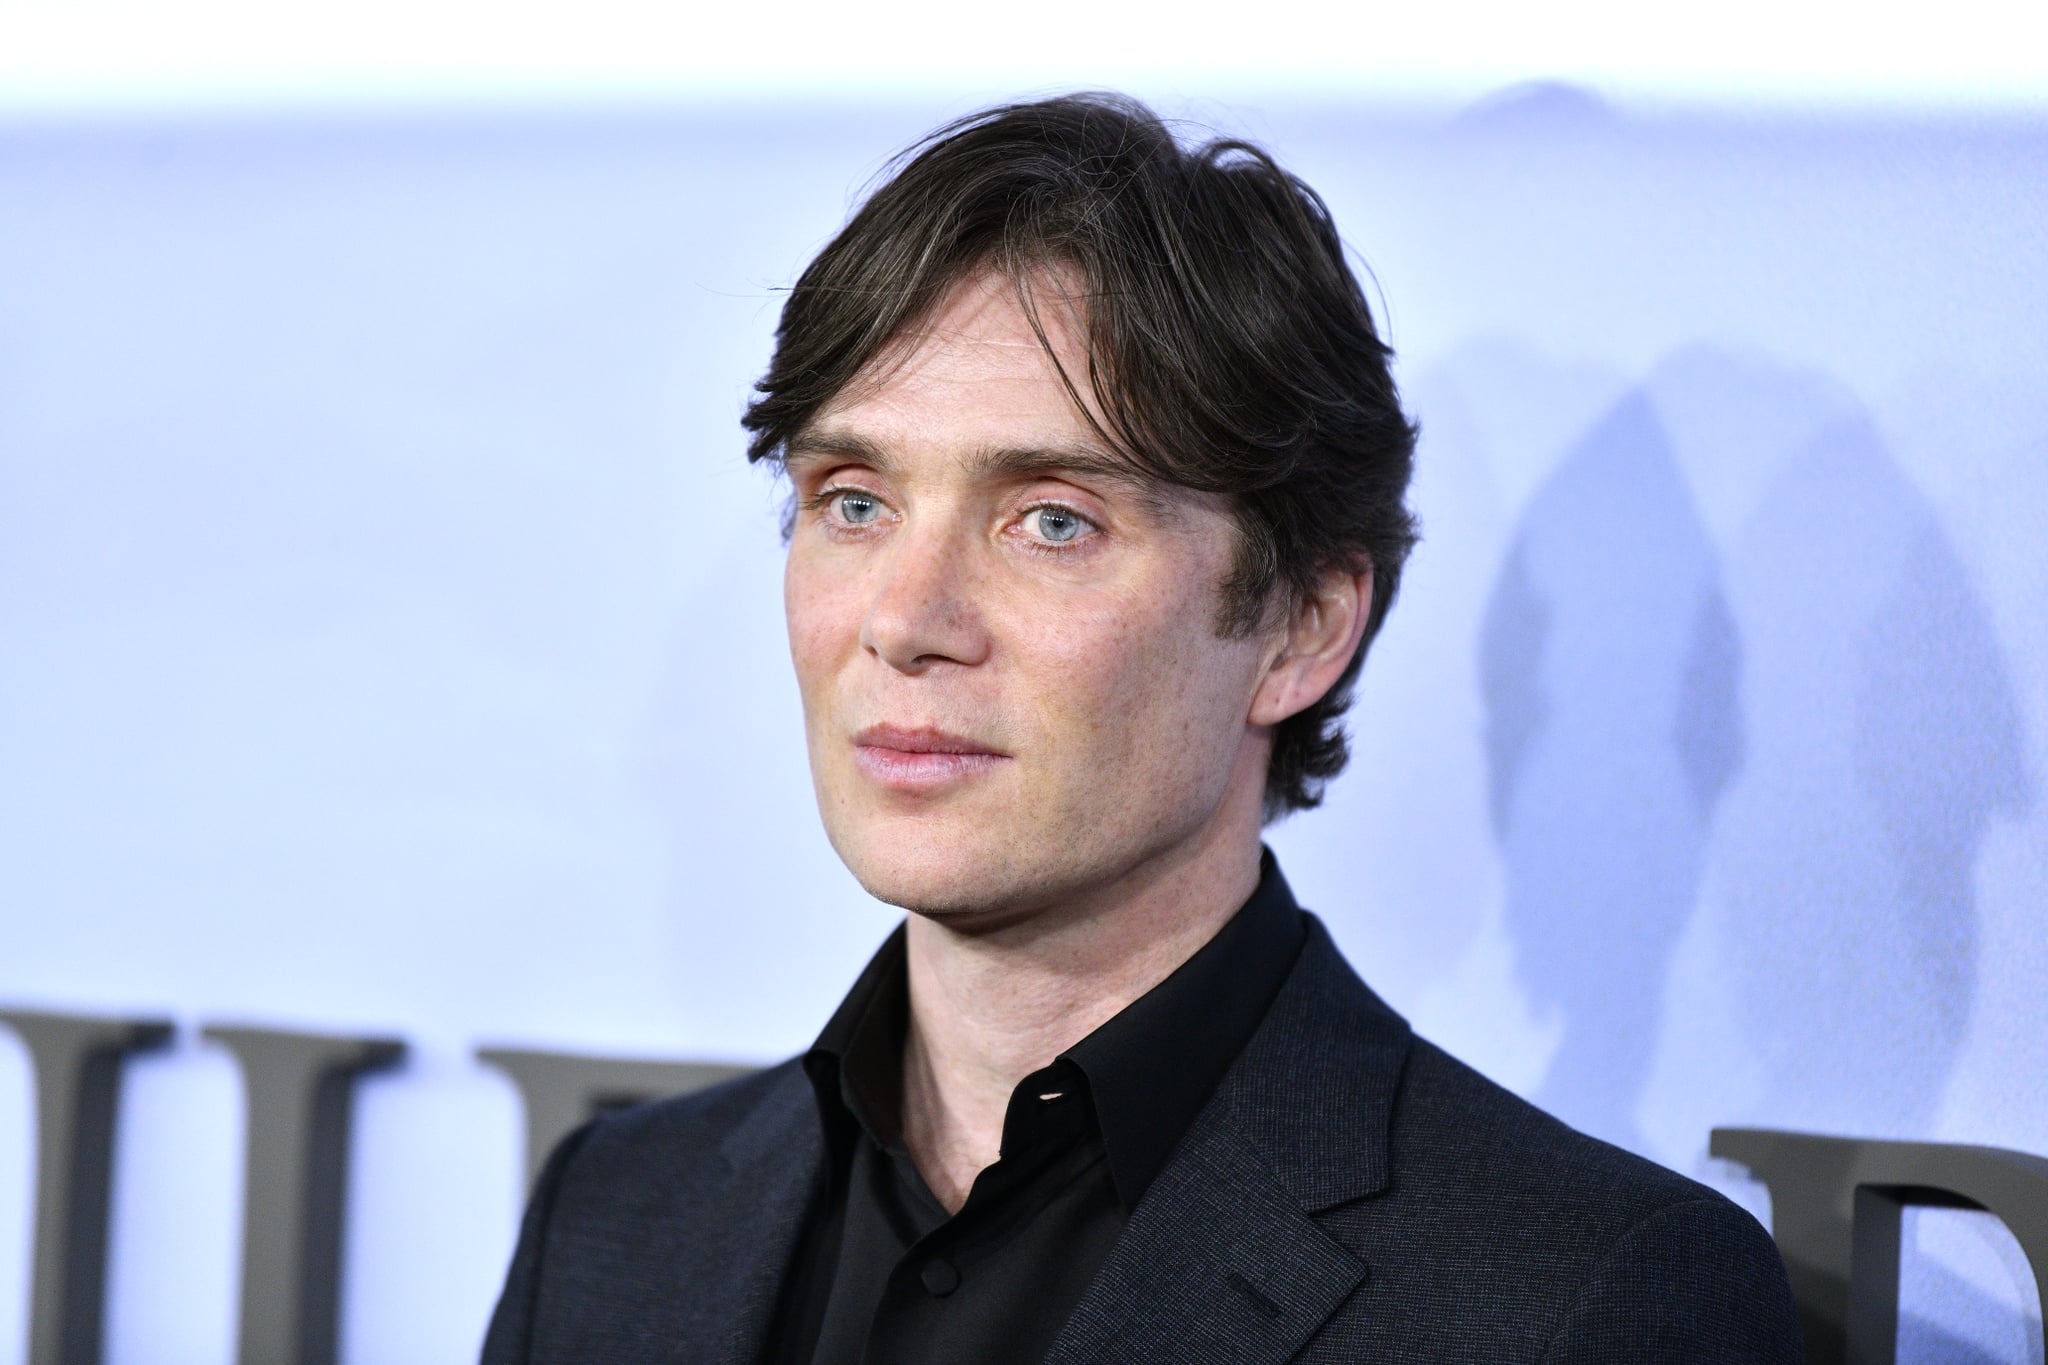 NEW YORK, NEW YORK - MARCH 08:  Cillian Murphy attends the World Premiere of 